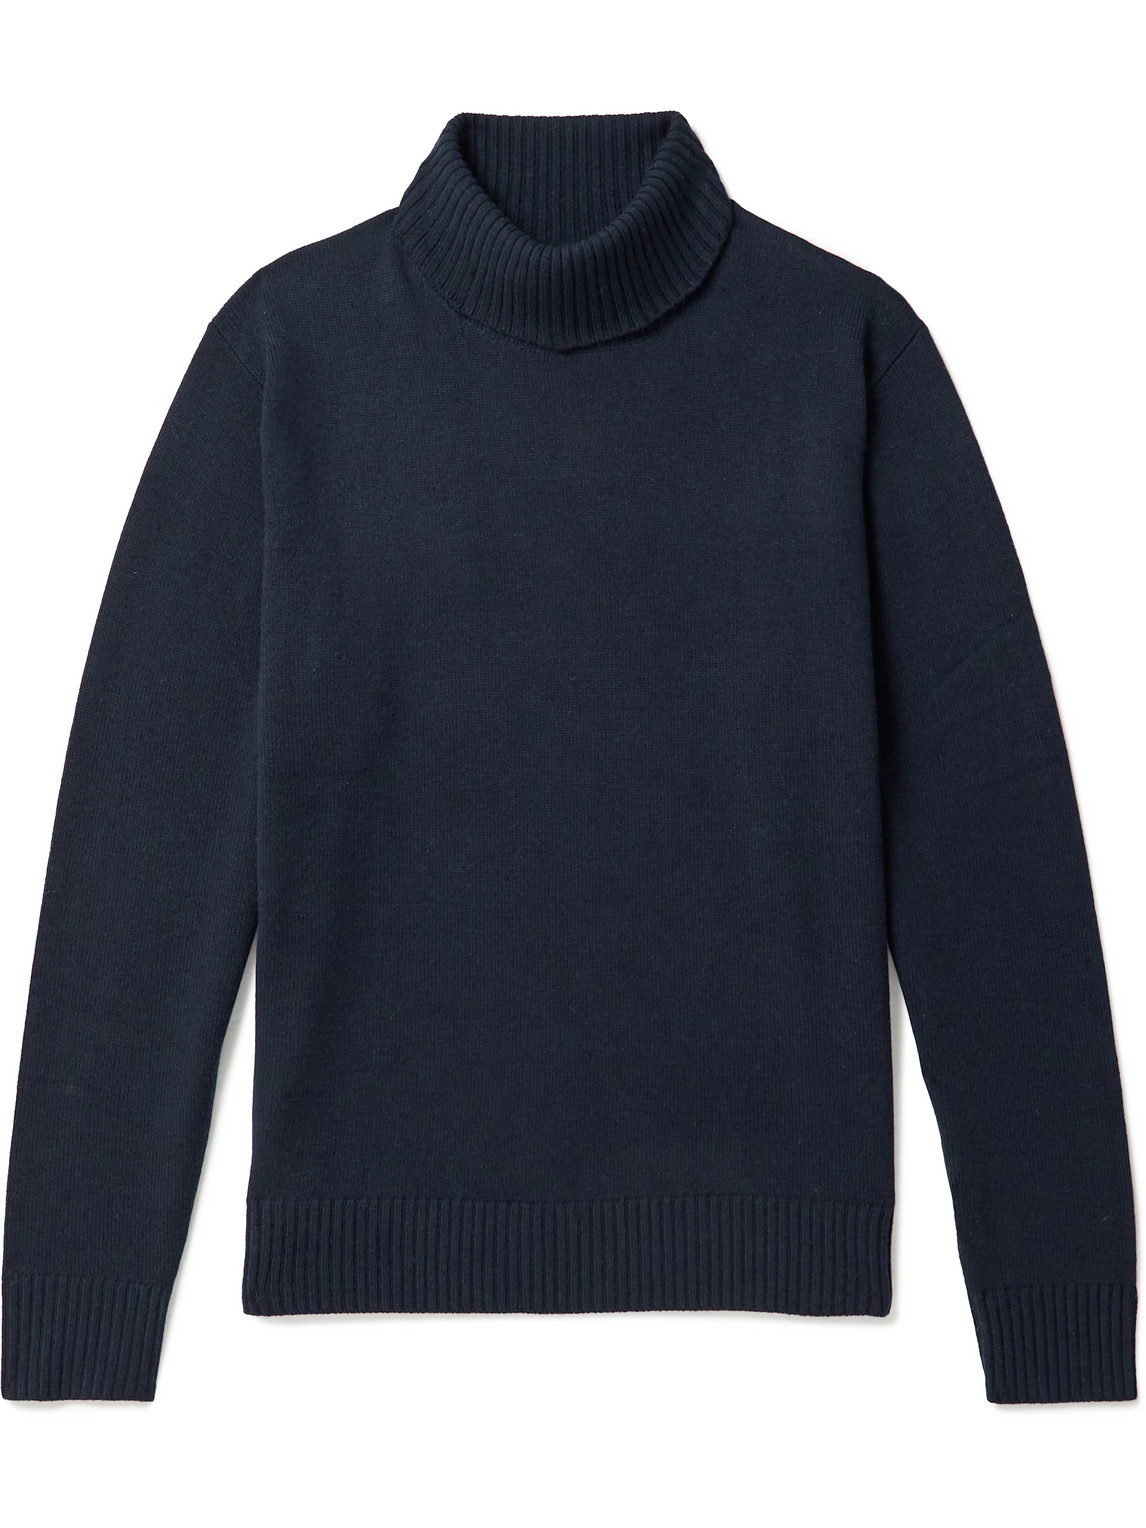 Peter Millar Merino Wool and Cashmere-Blend Rollneck Sweater